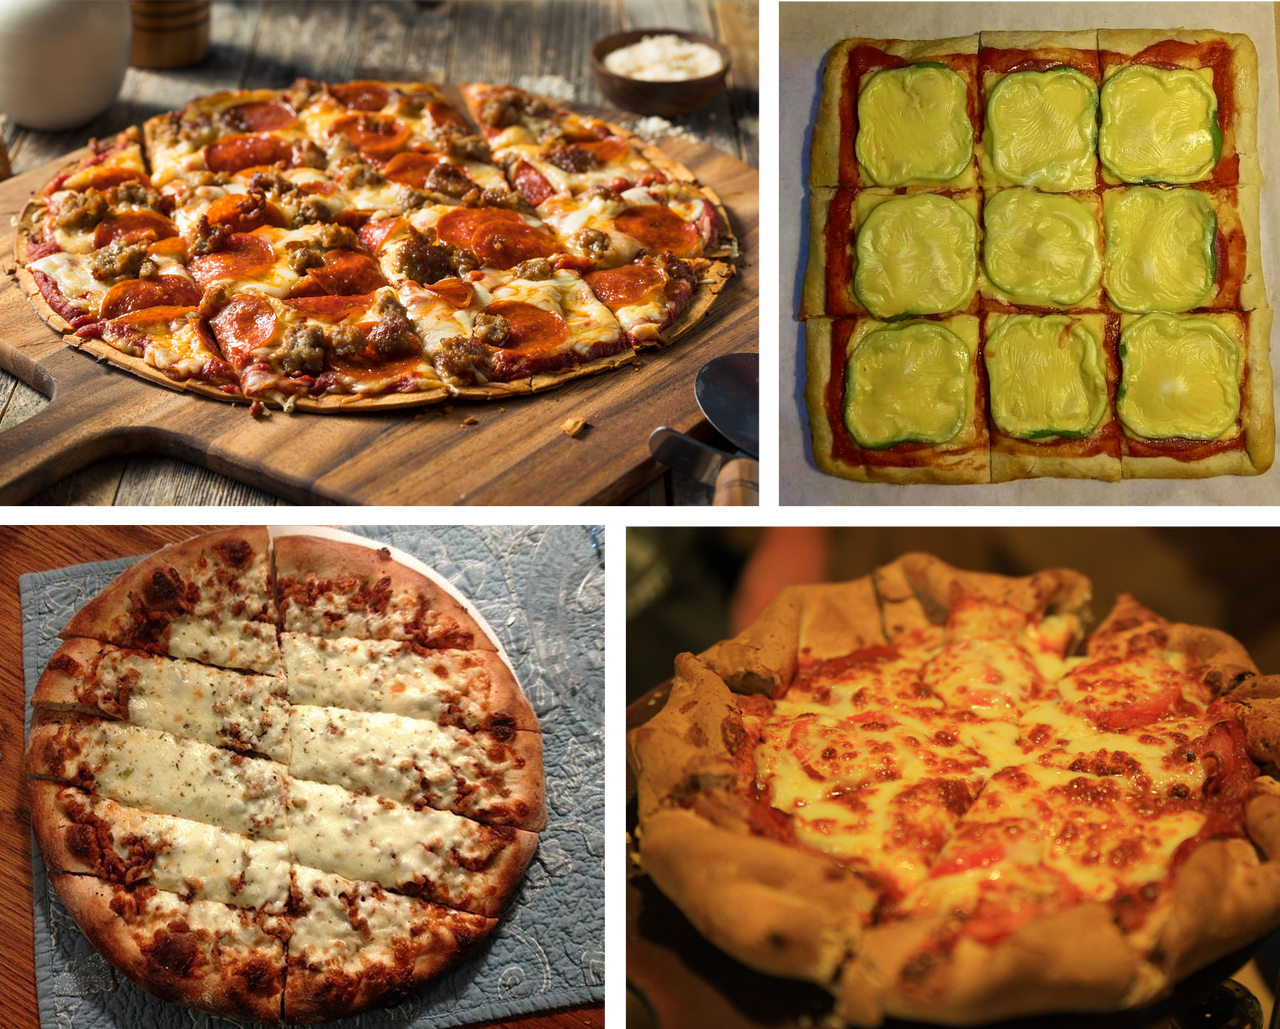 Four intriguing pizza styles from across the United States.